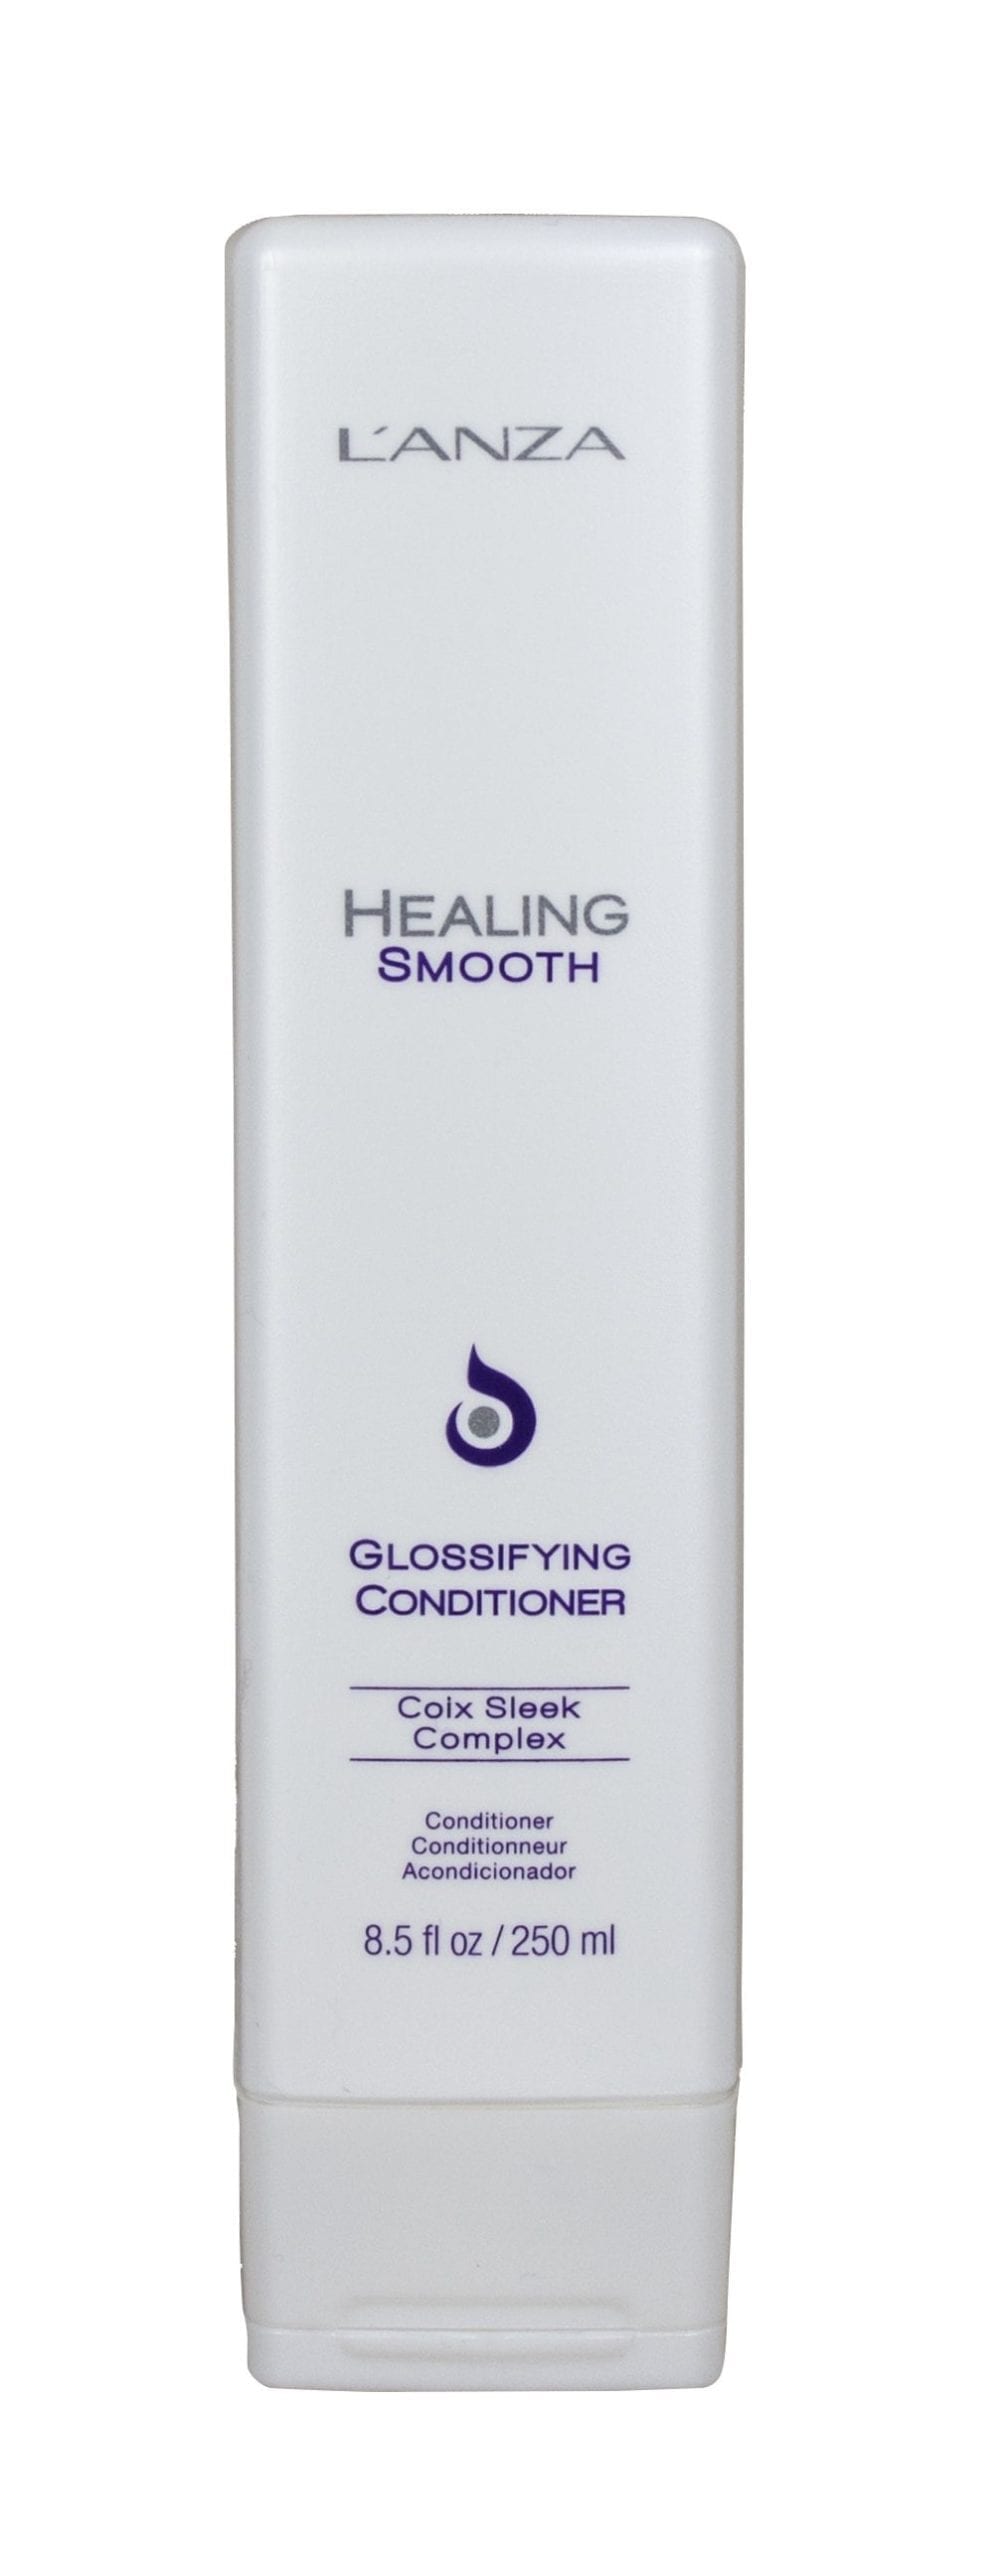 L'ANZA | HEALING SMOOTH Glossifying Conditioner | 250 ml